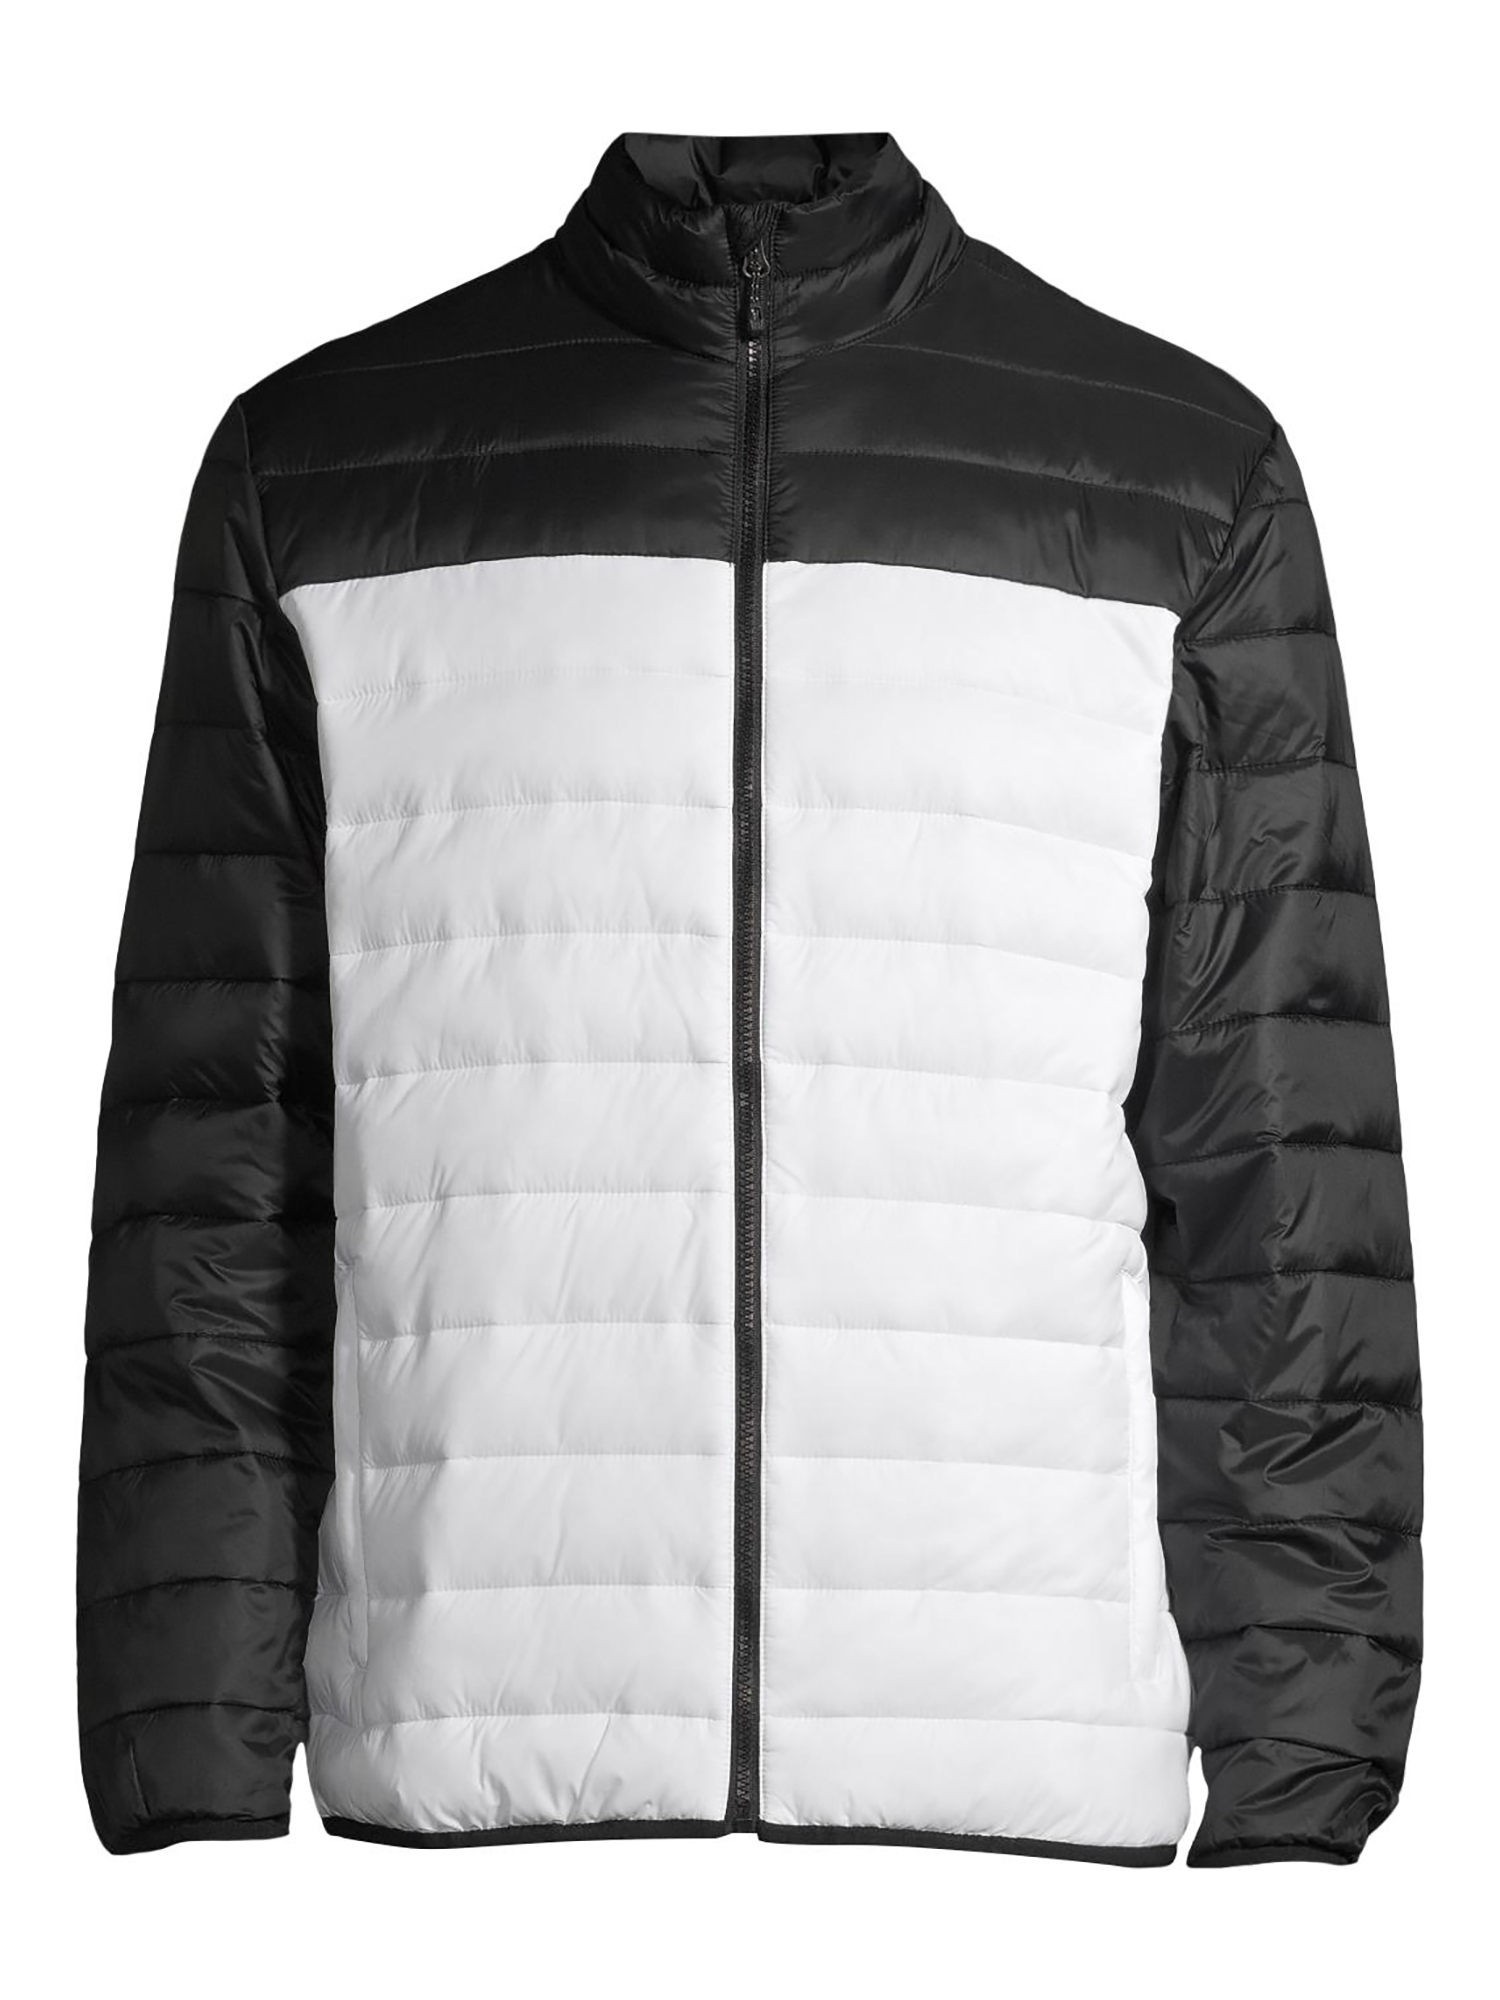 SwissTech Men's and Big Men's Puffer Jacket, Up to Size 5XL - image 3 of 6